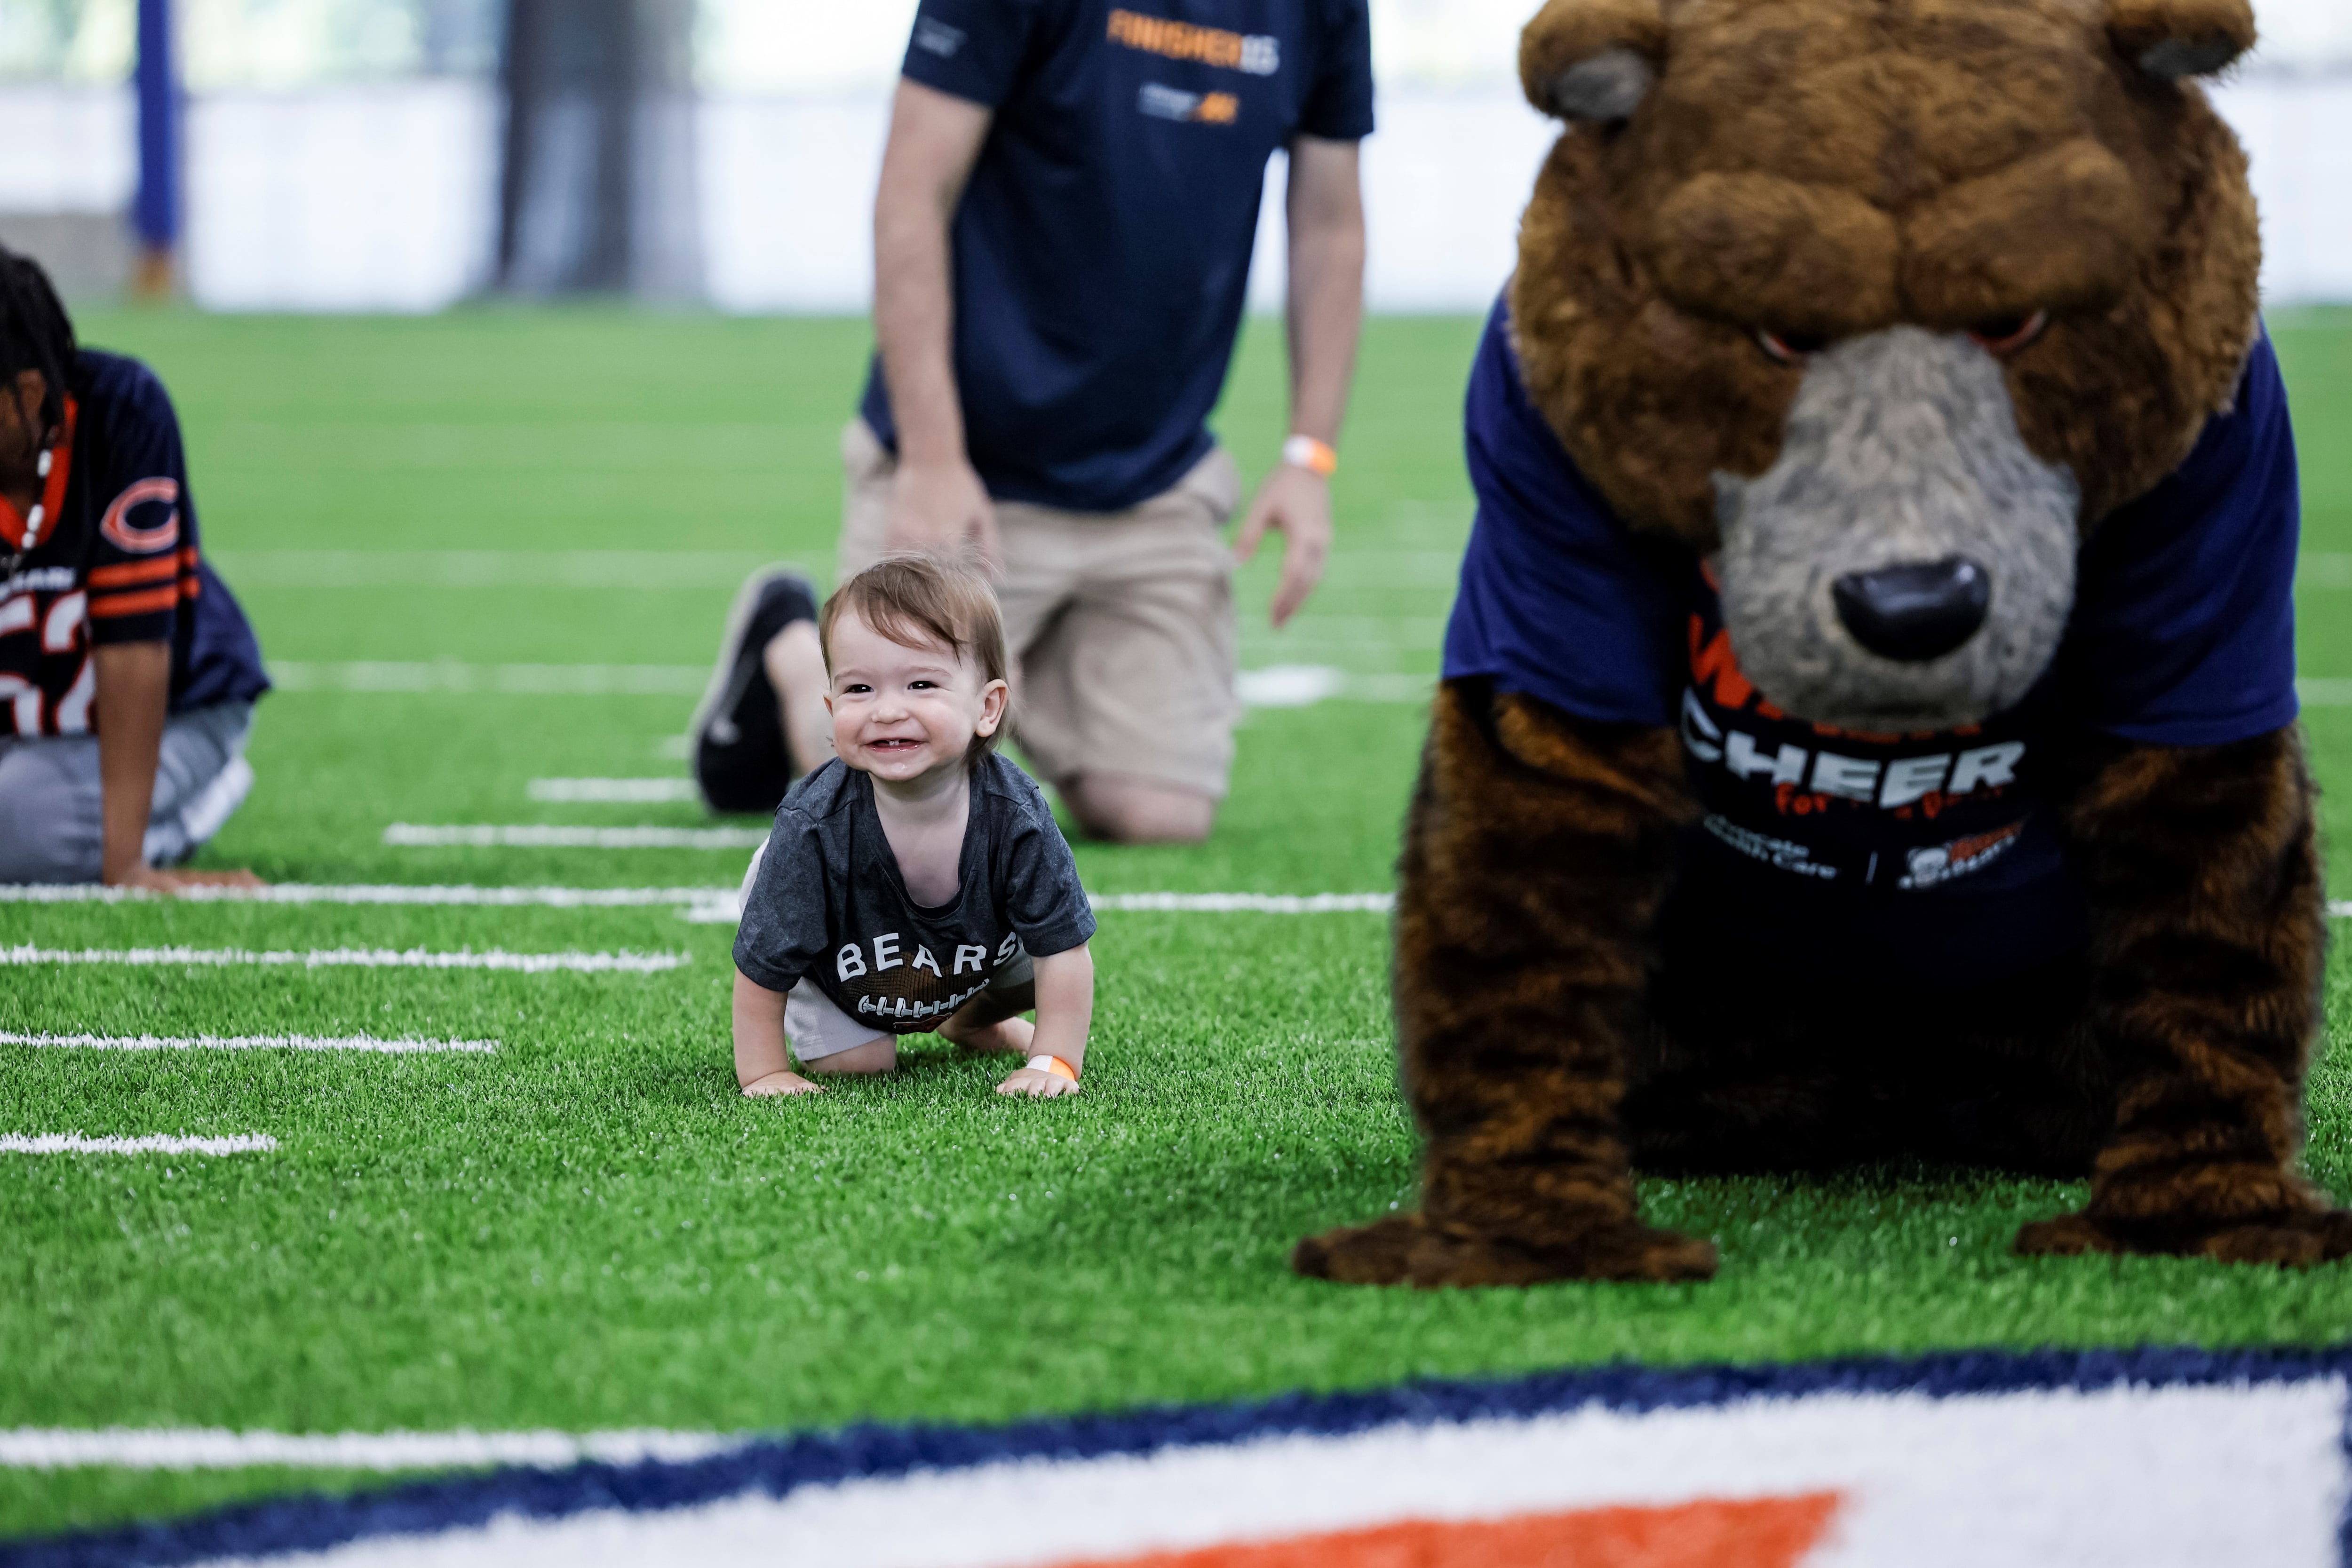 Baby crawls to victory at EGO Outdoor Power Equipment Chicago Bears training camp